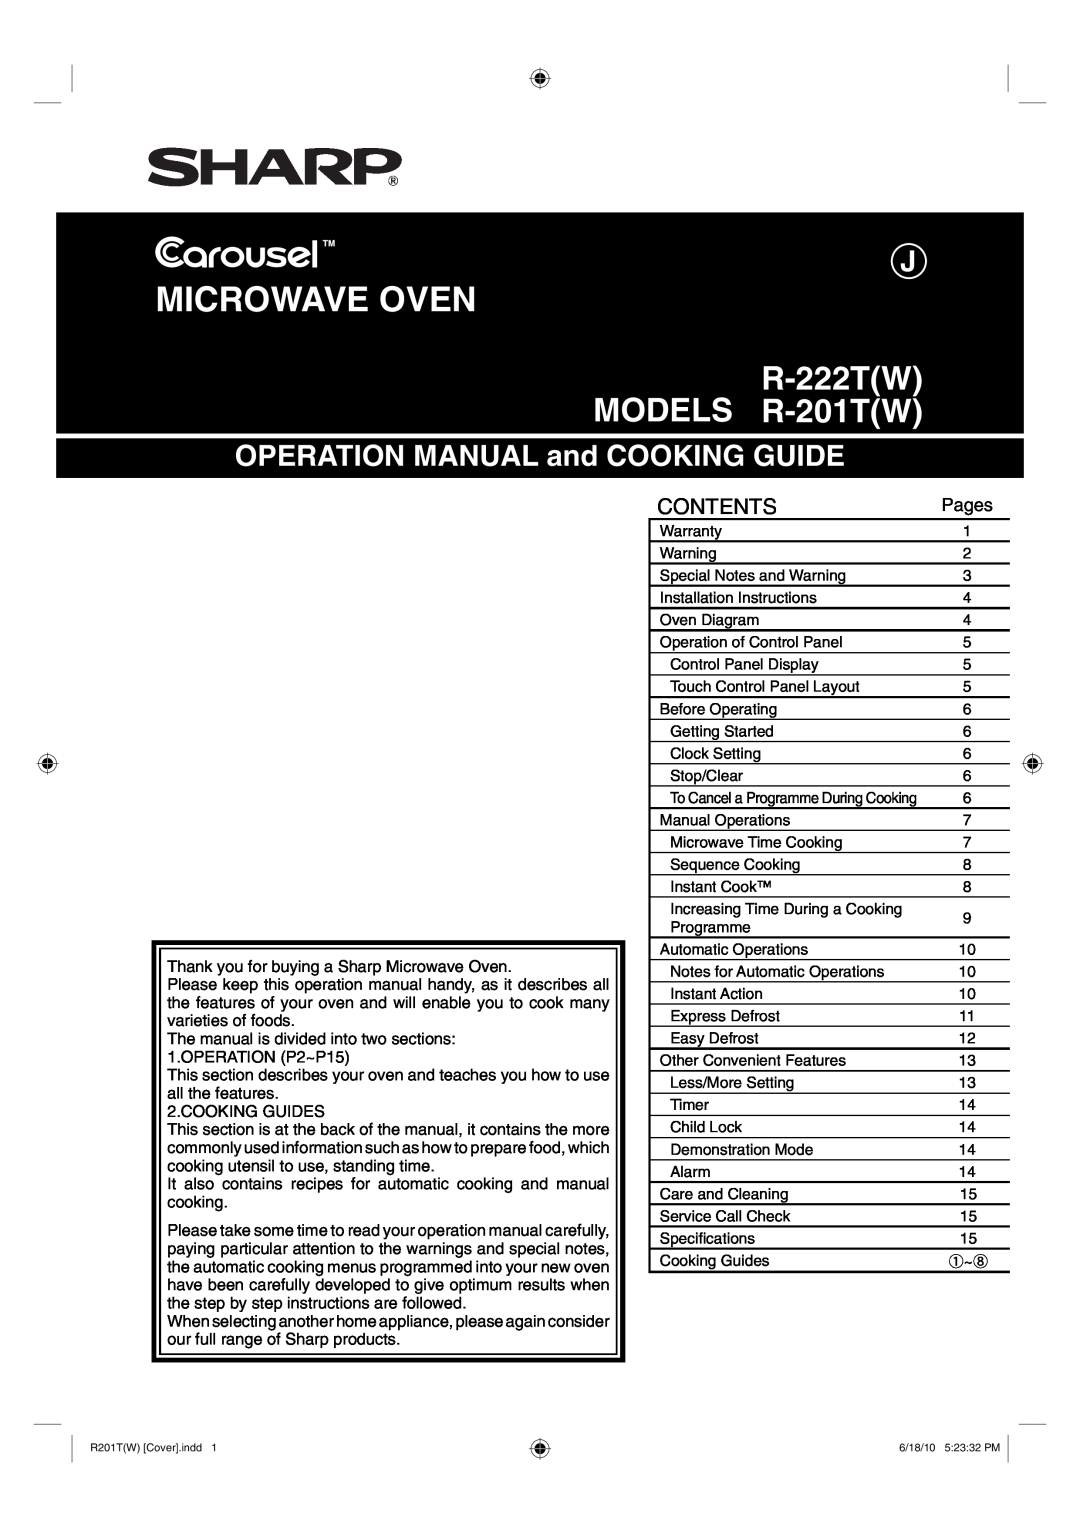 Sharp R-222T(W), R-201T(W) operation manual Microwave Oven, R-222TW MODELS R-201TW, Contents, Pages 